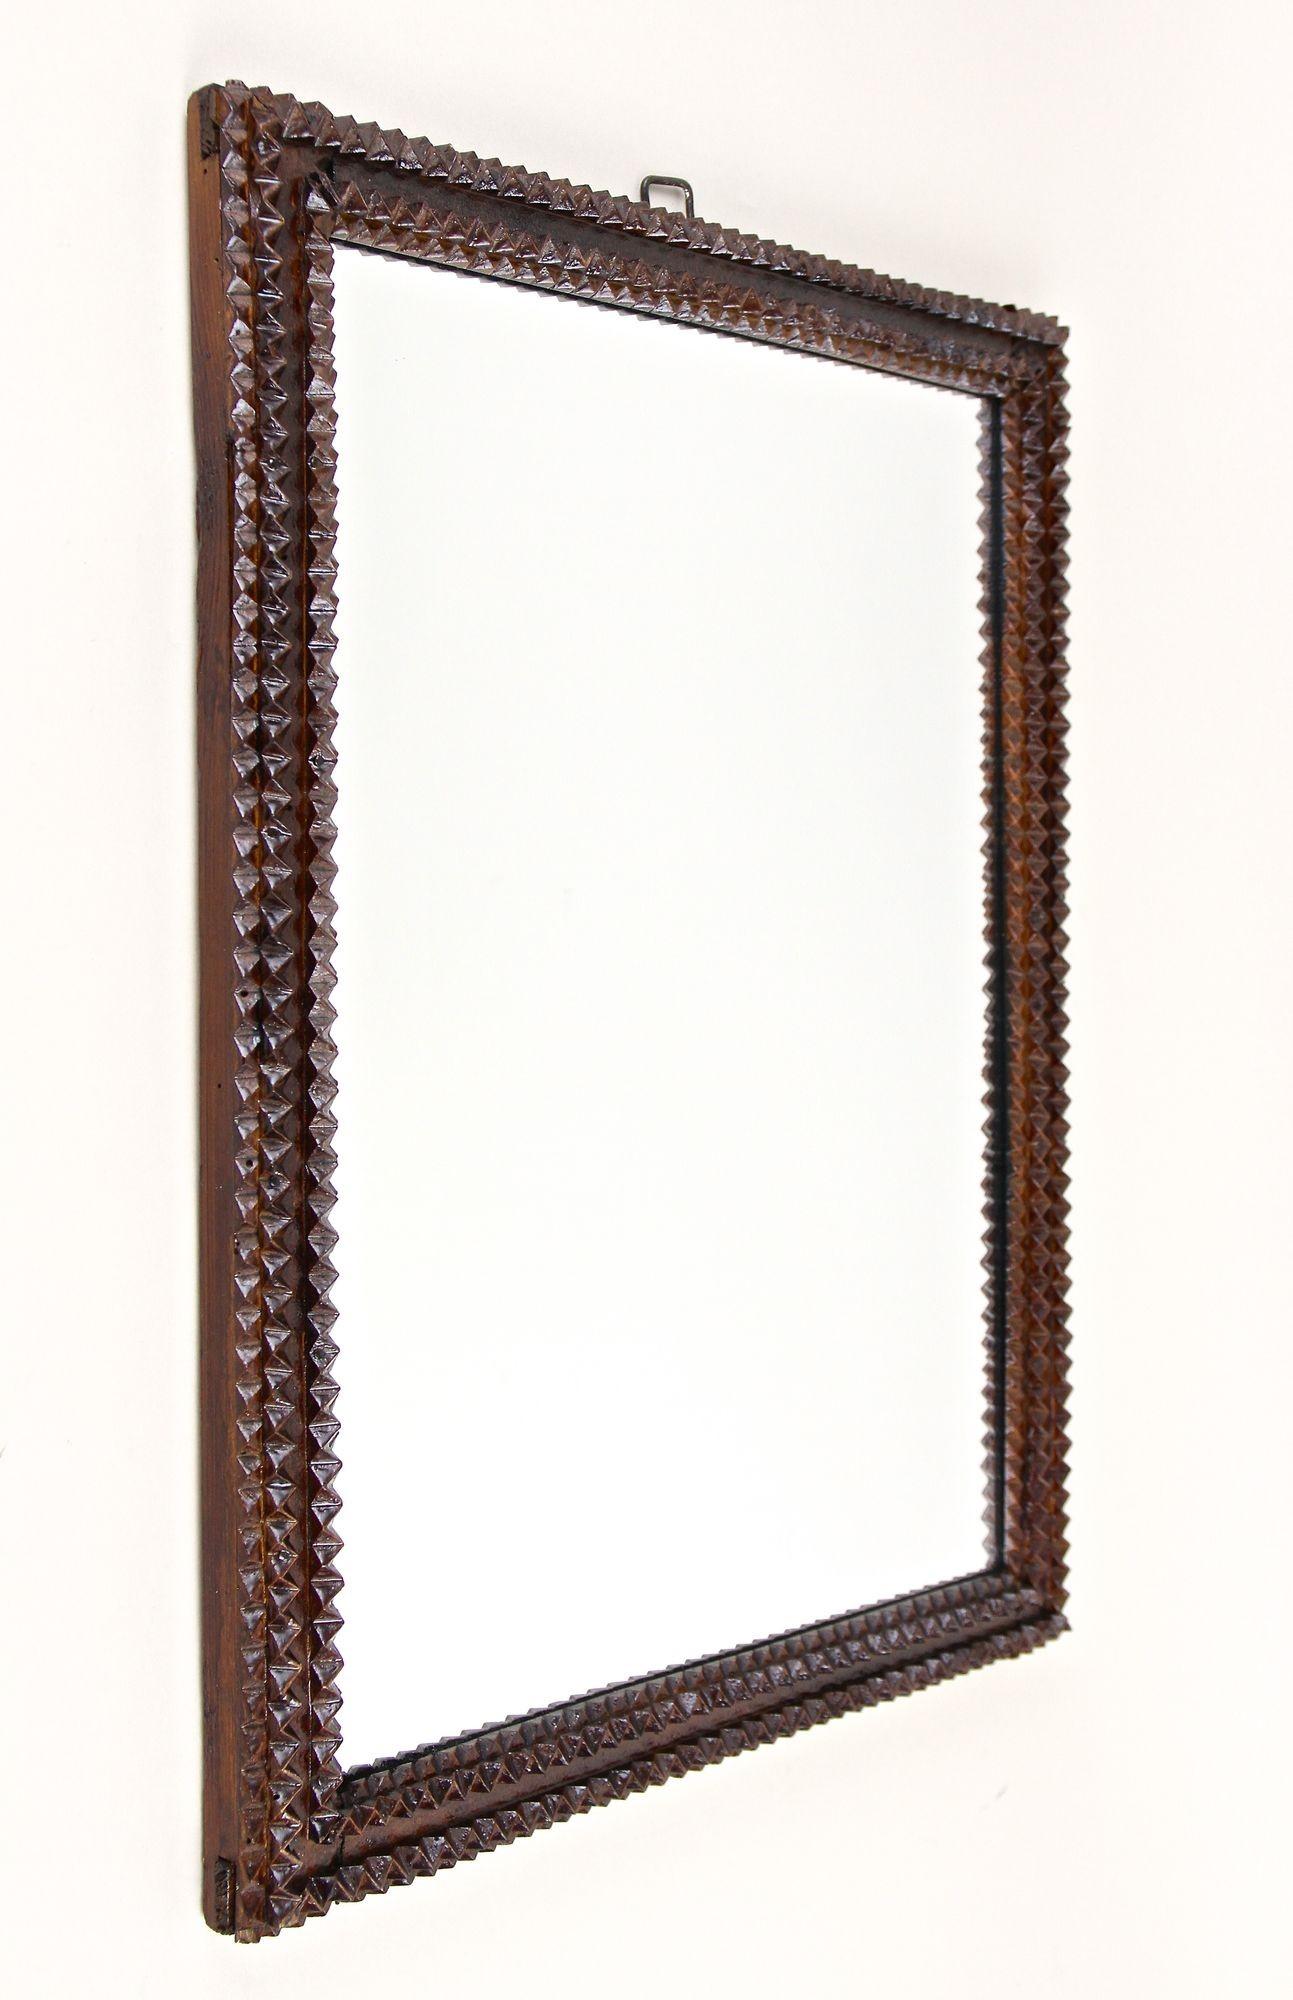 Beautiful late 19th century rustic Tramp Art wall mirror coming out of Austria from the period around 1870. The lovely brown stained, hand carved basswood frame shows beautiful chip carvings - a technique which confers this very popular kind of